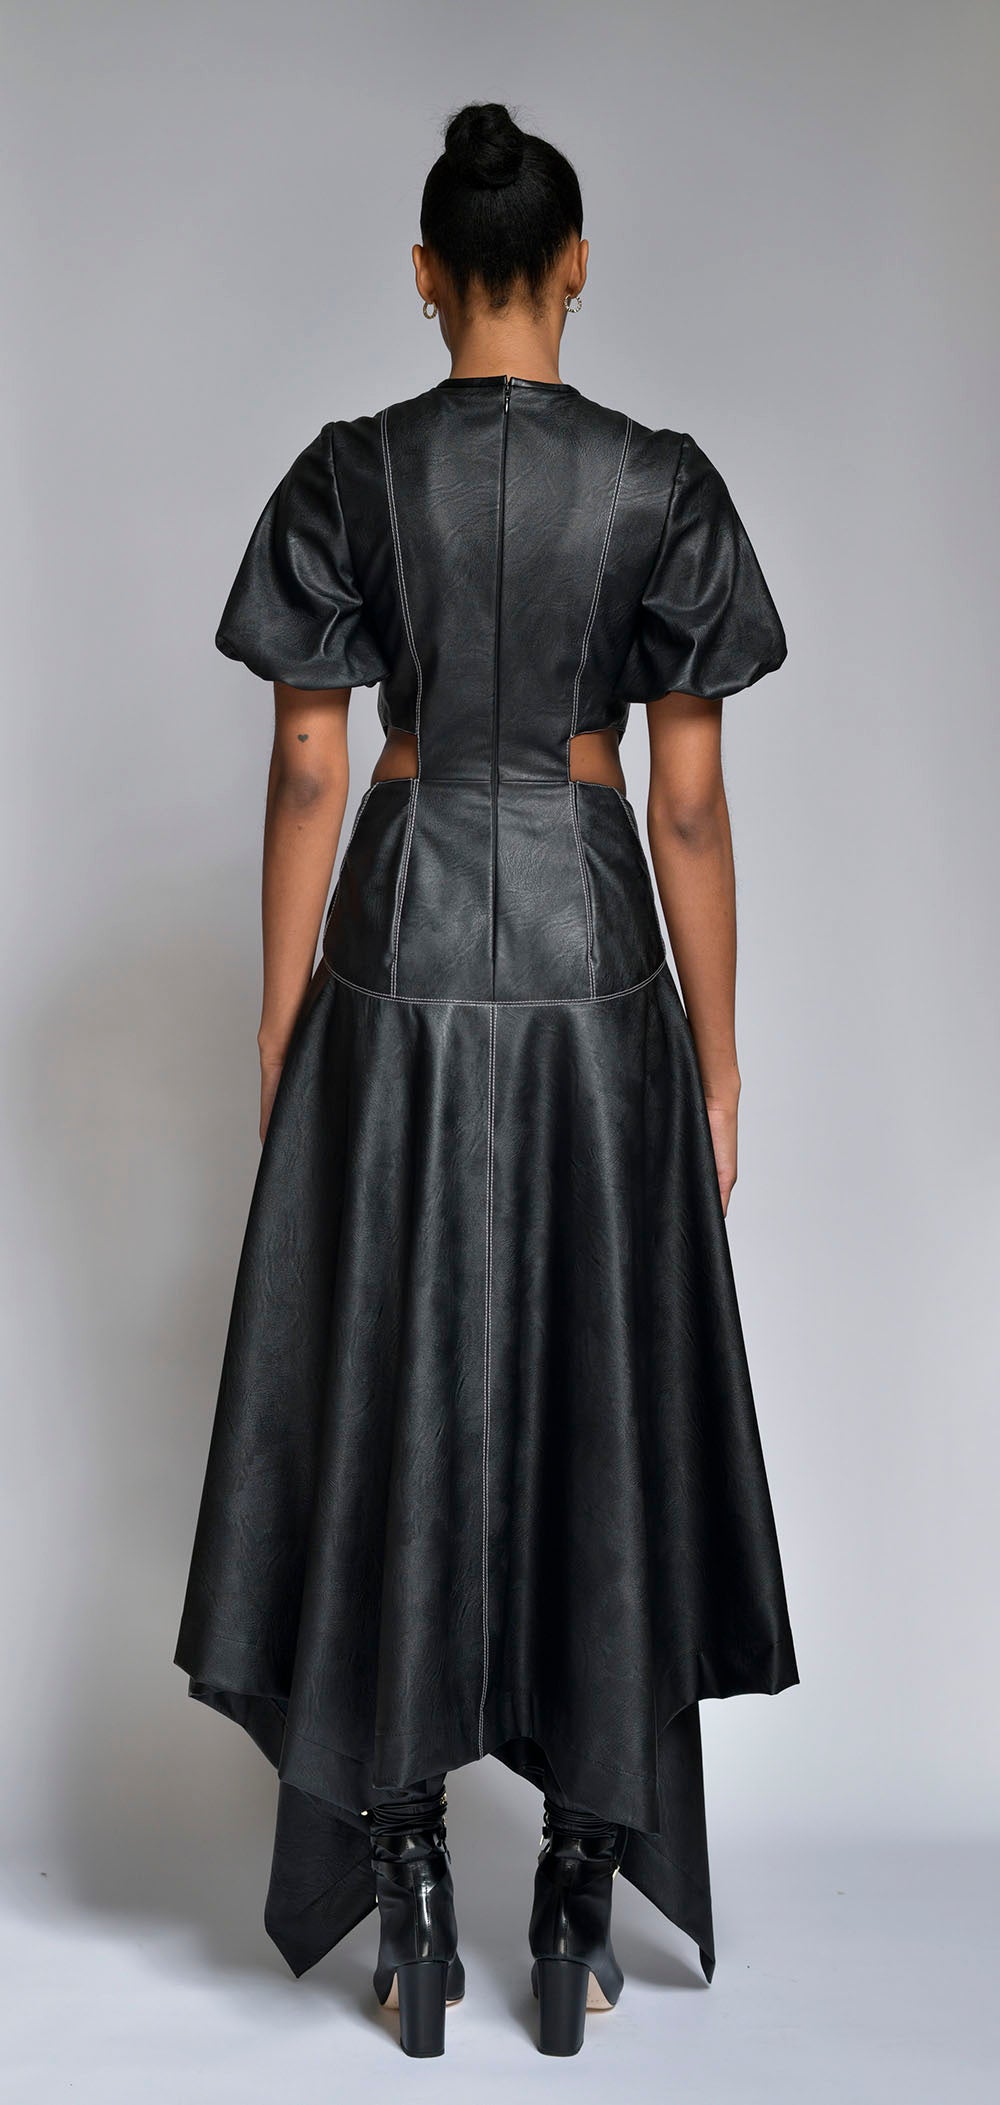 Onyx Vegan Leather with Cut-out Detail and Handkerchief Hem